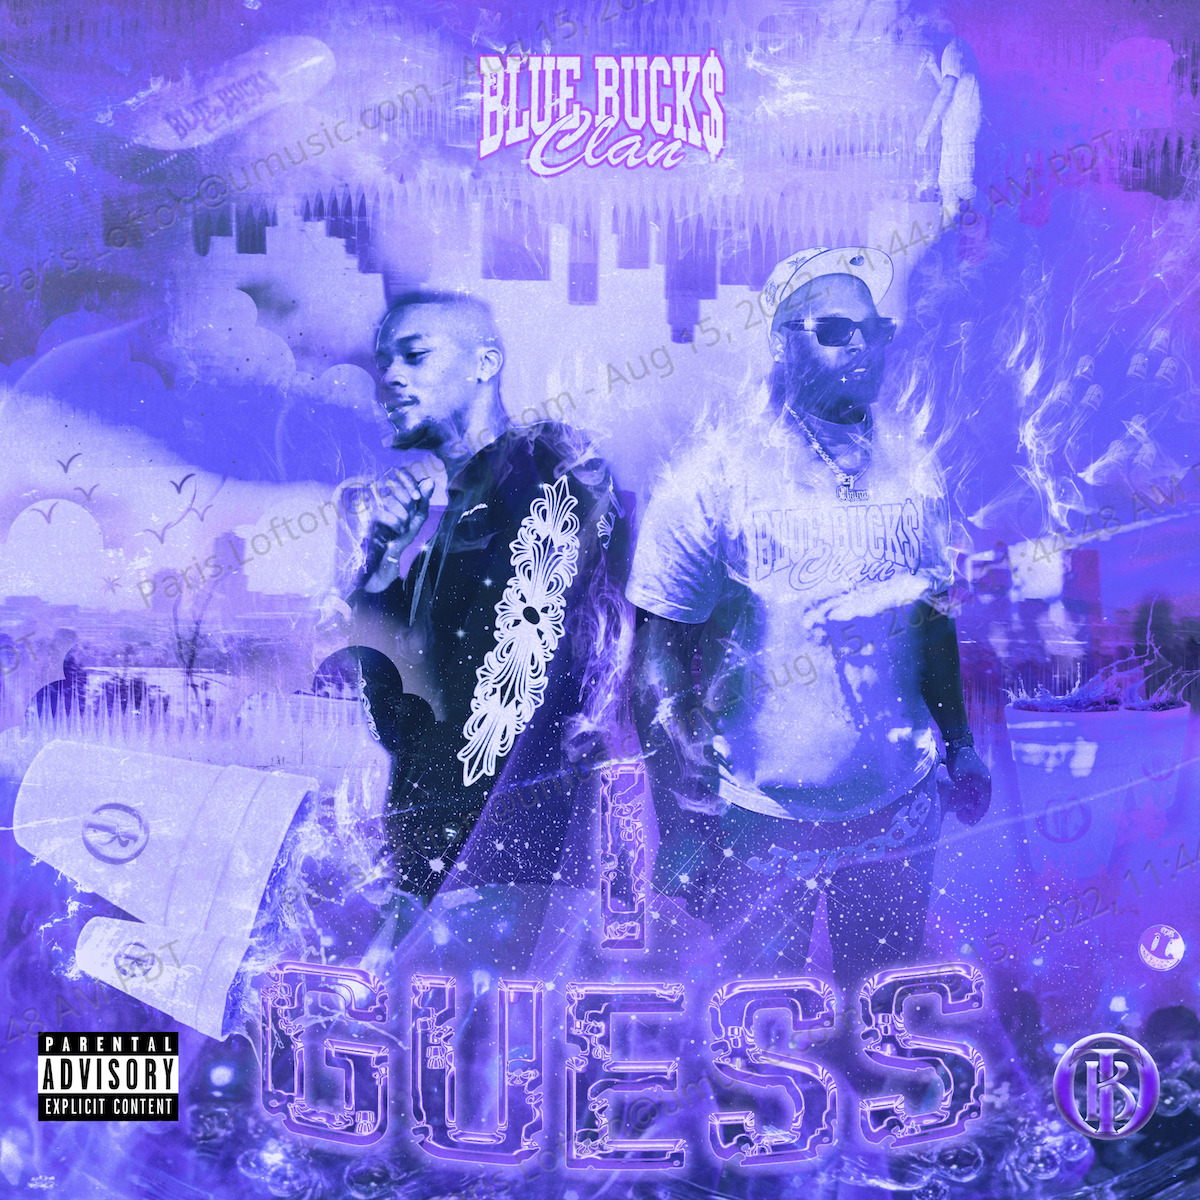 Press photo and artwork for BLUEBUCKSCLAN "I GUESS" and "CLAN WAY 3